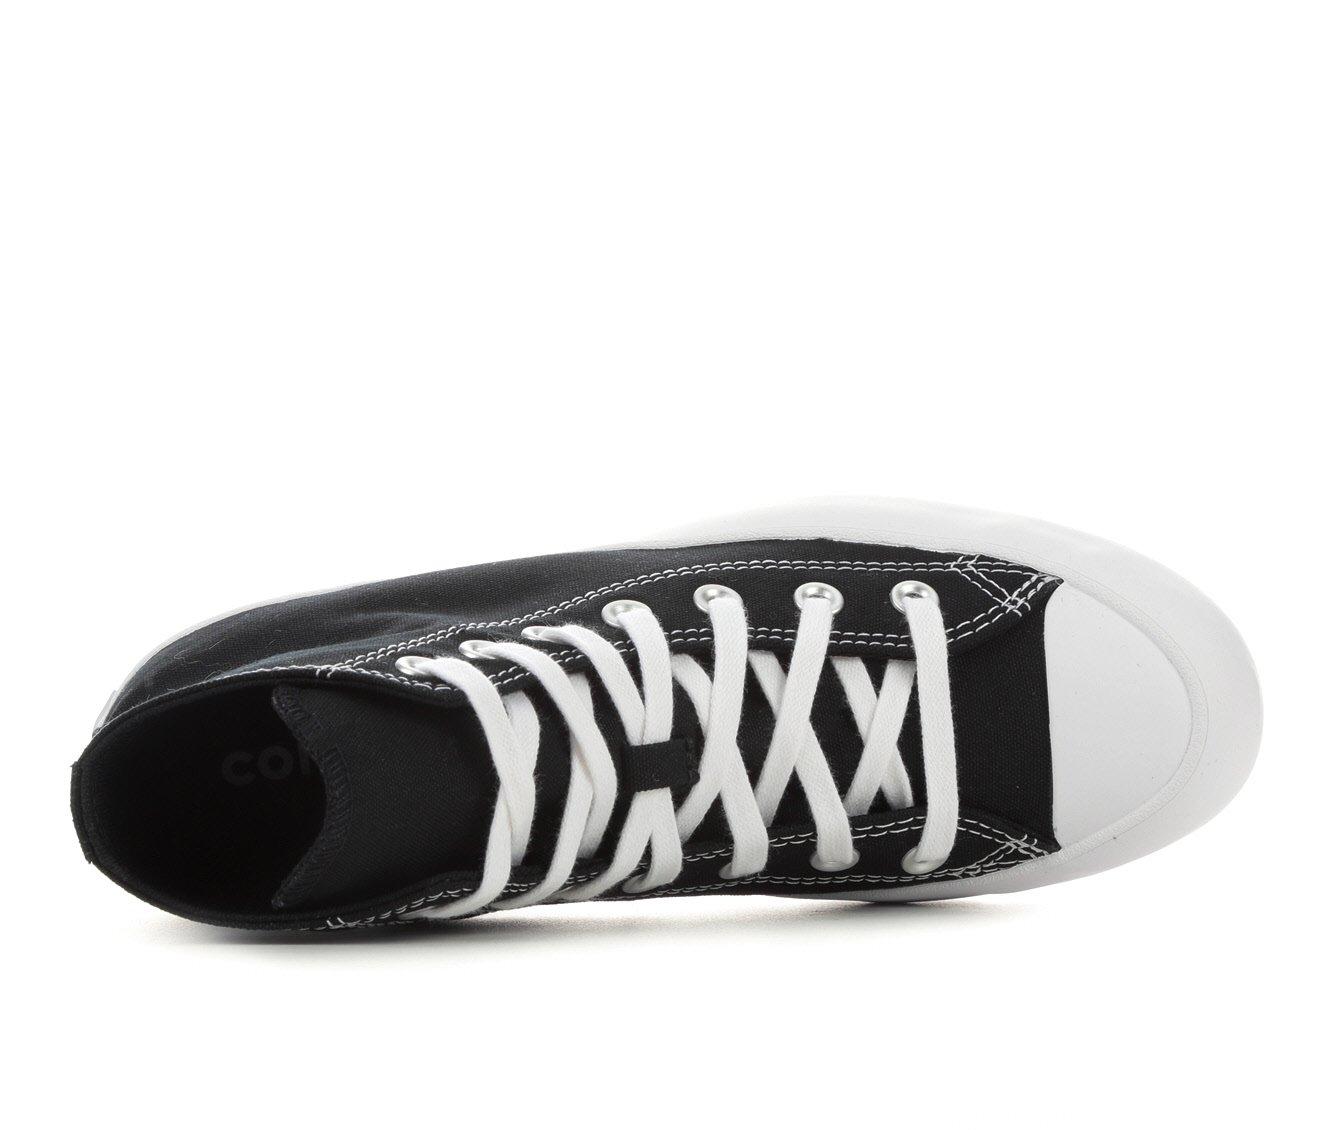 Women's Converse Chuck Taylor All Star Lugged Platform Sneakers | Shoe ...